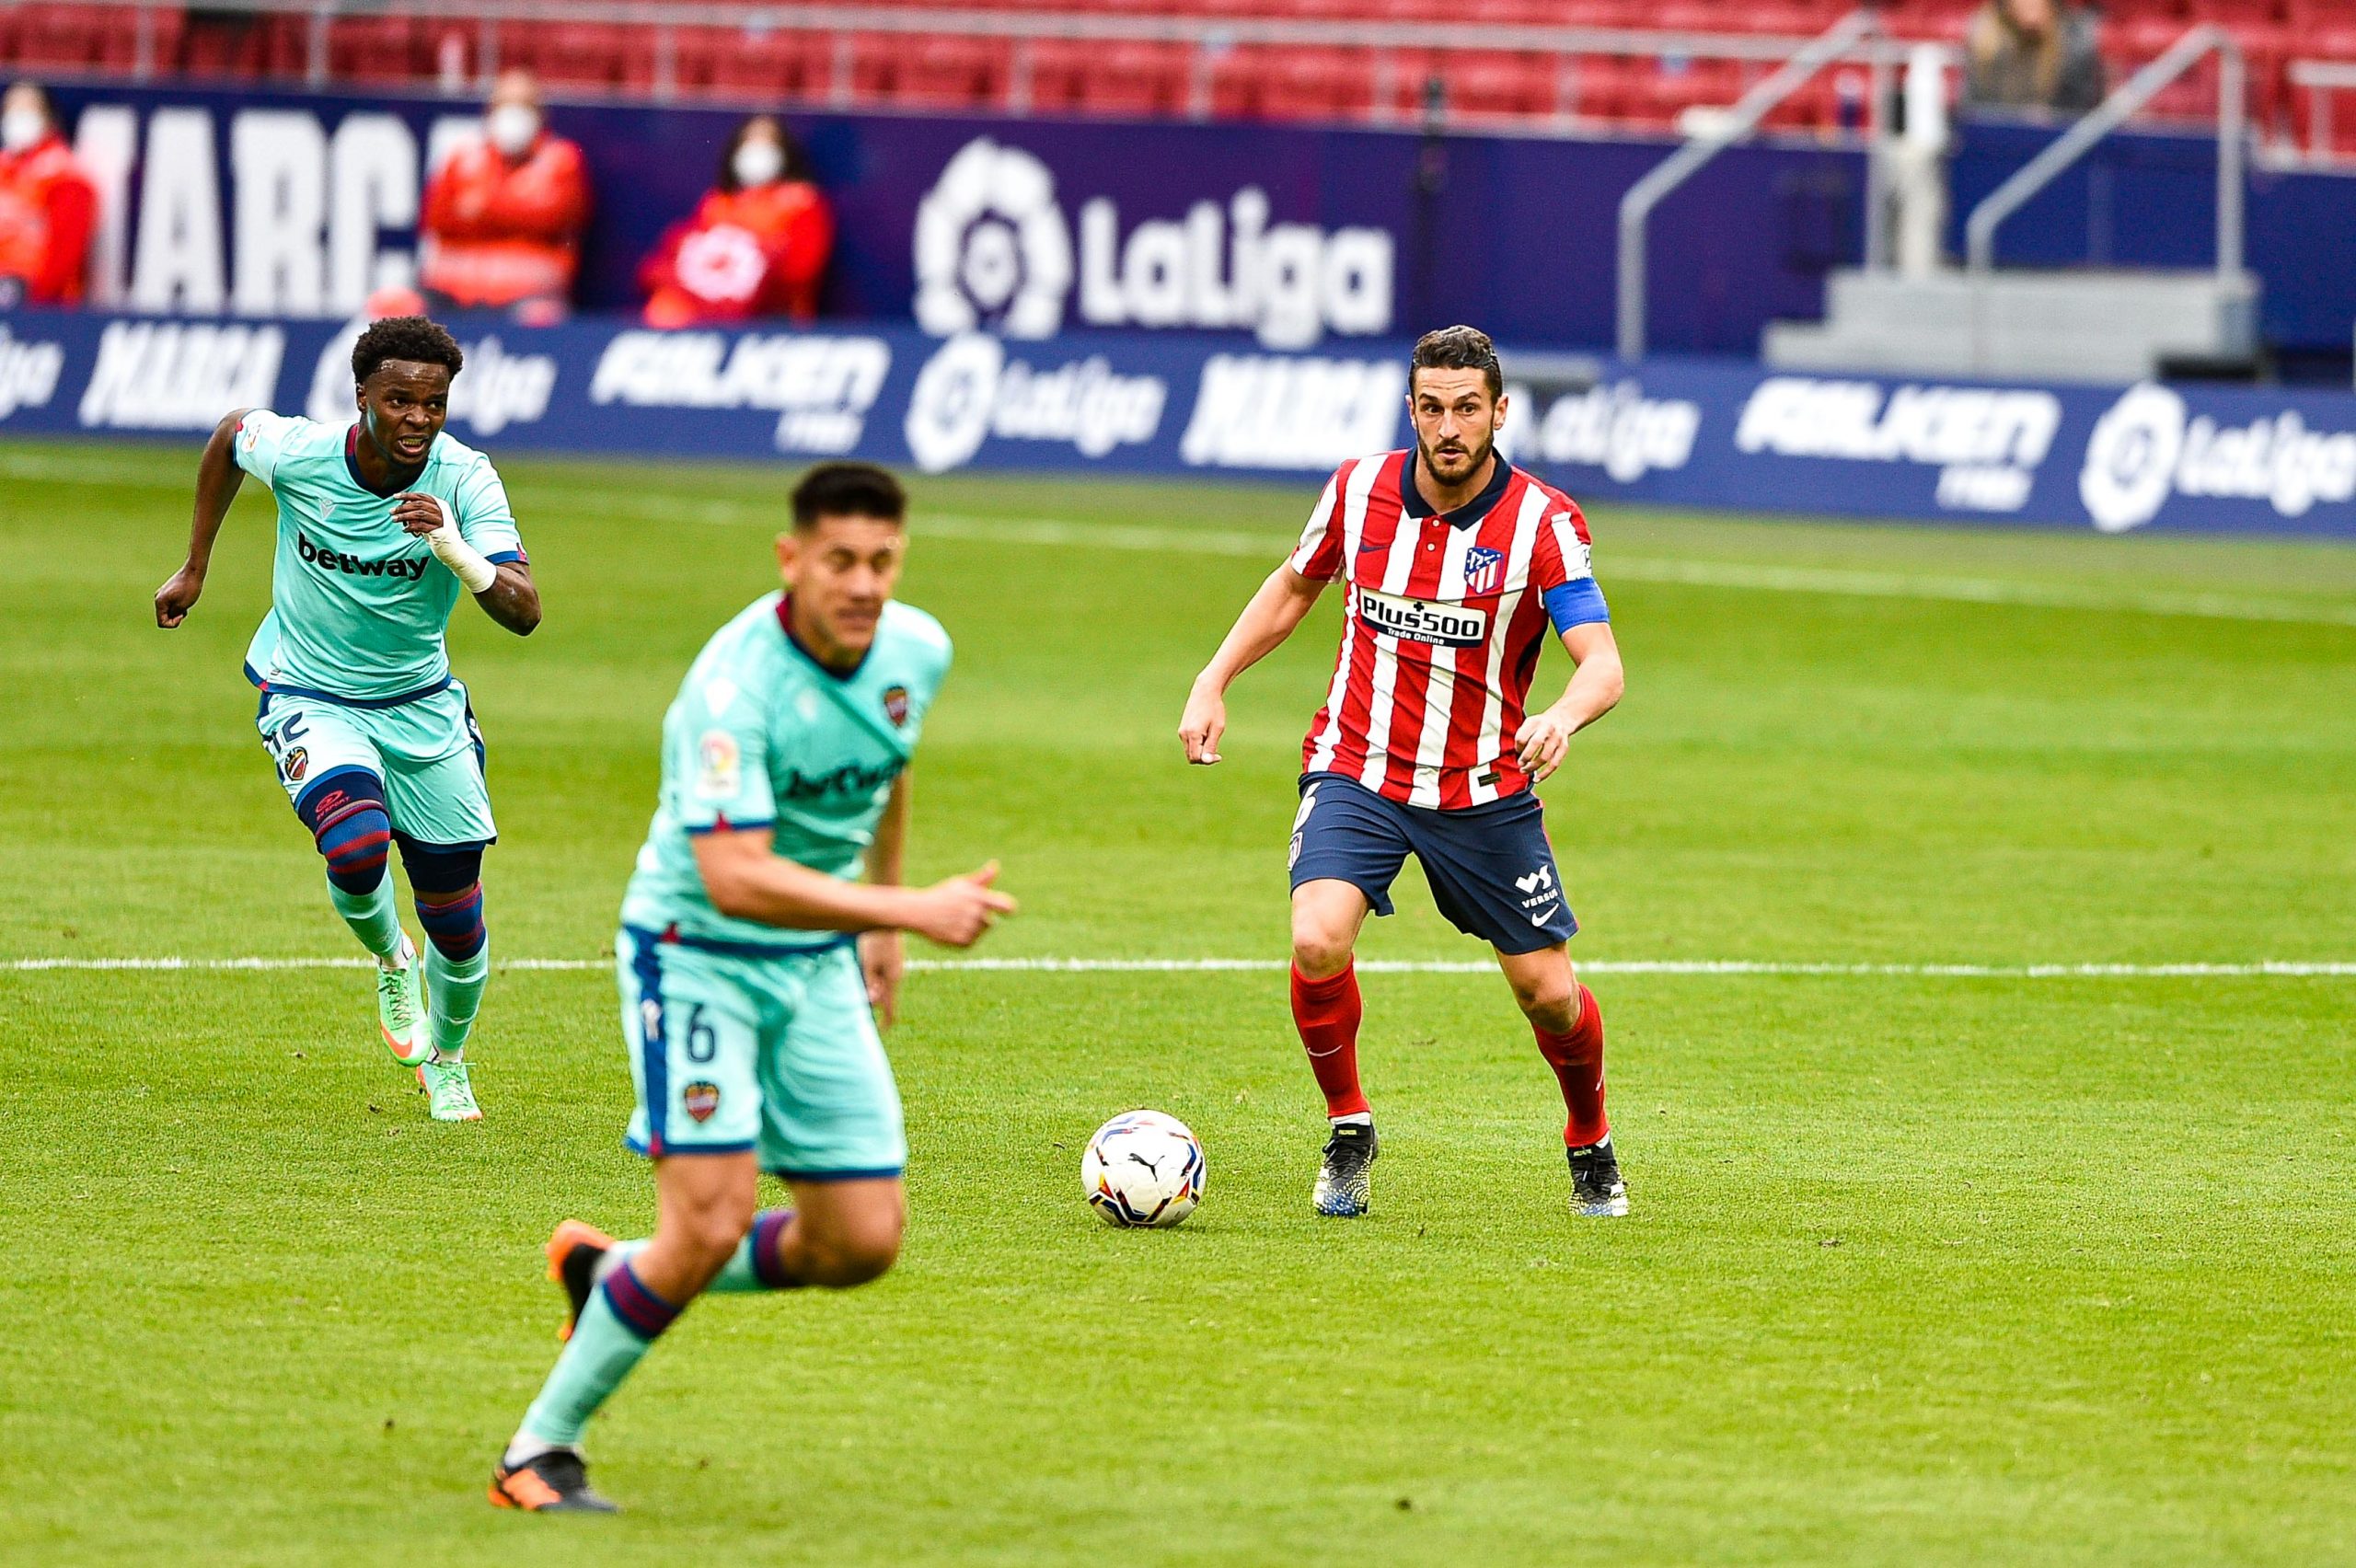 Atletico hand renewed La Liga title hopes to rivals by losing to Levante